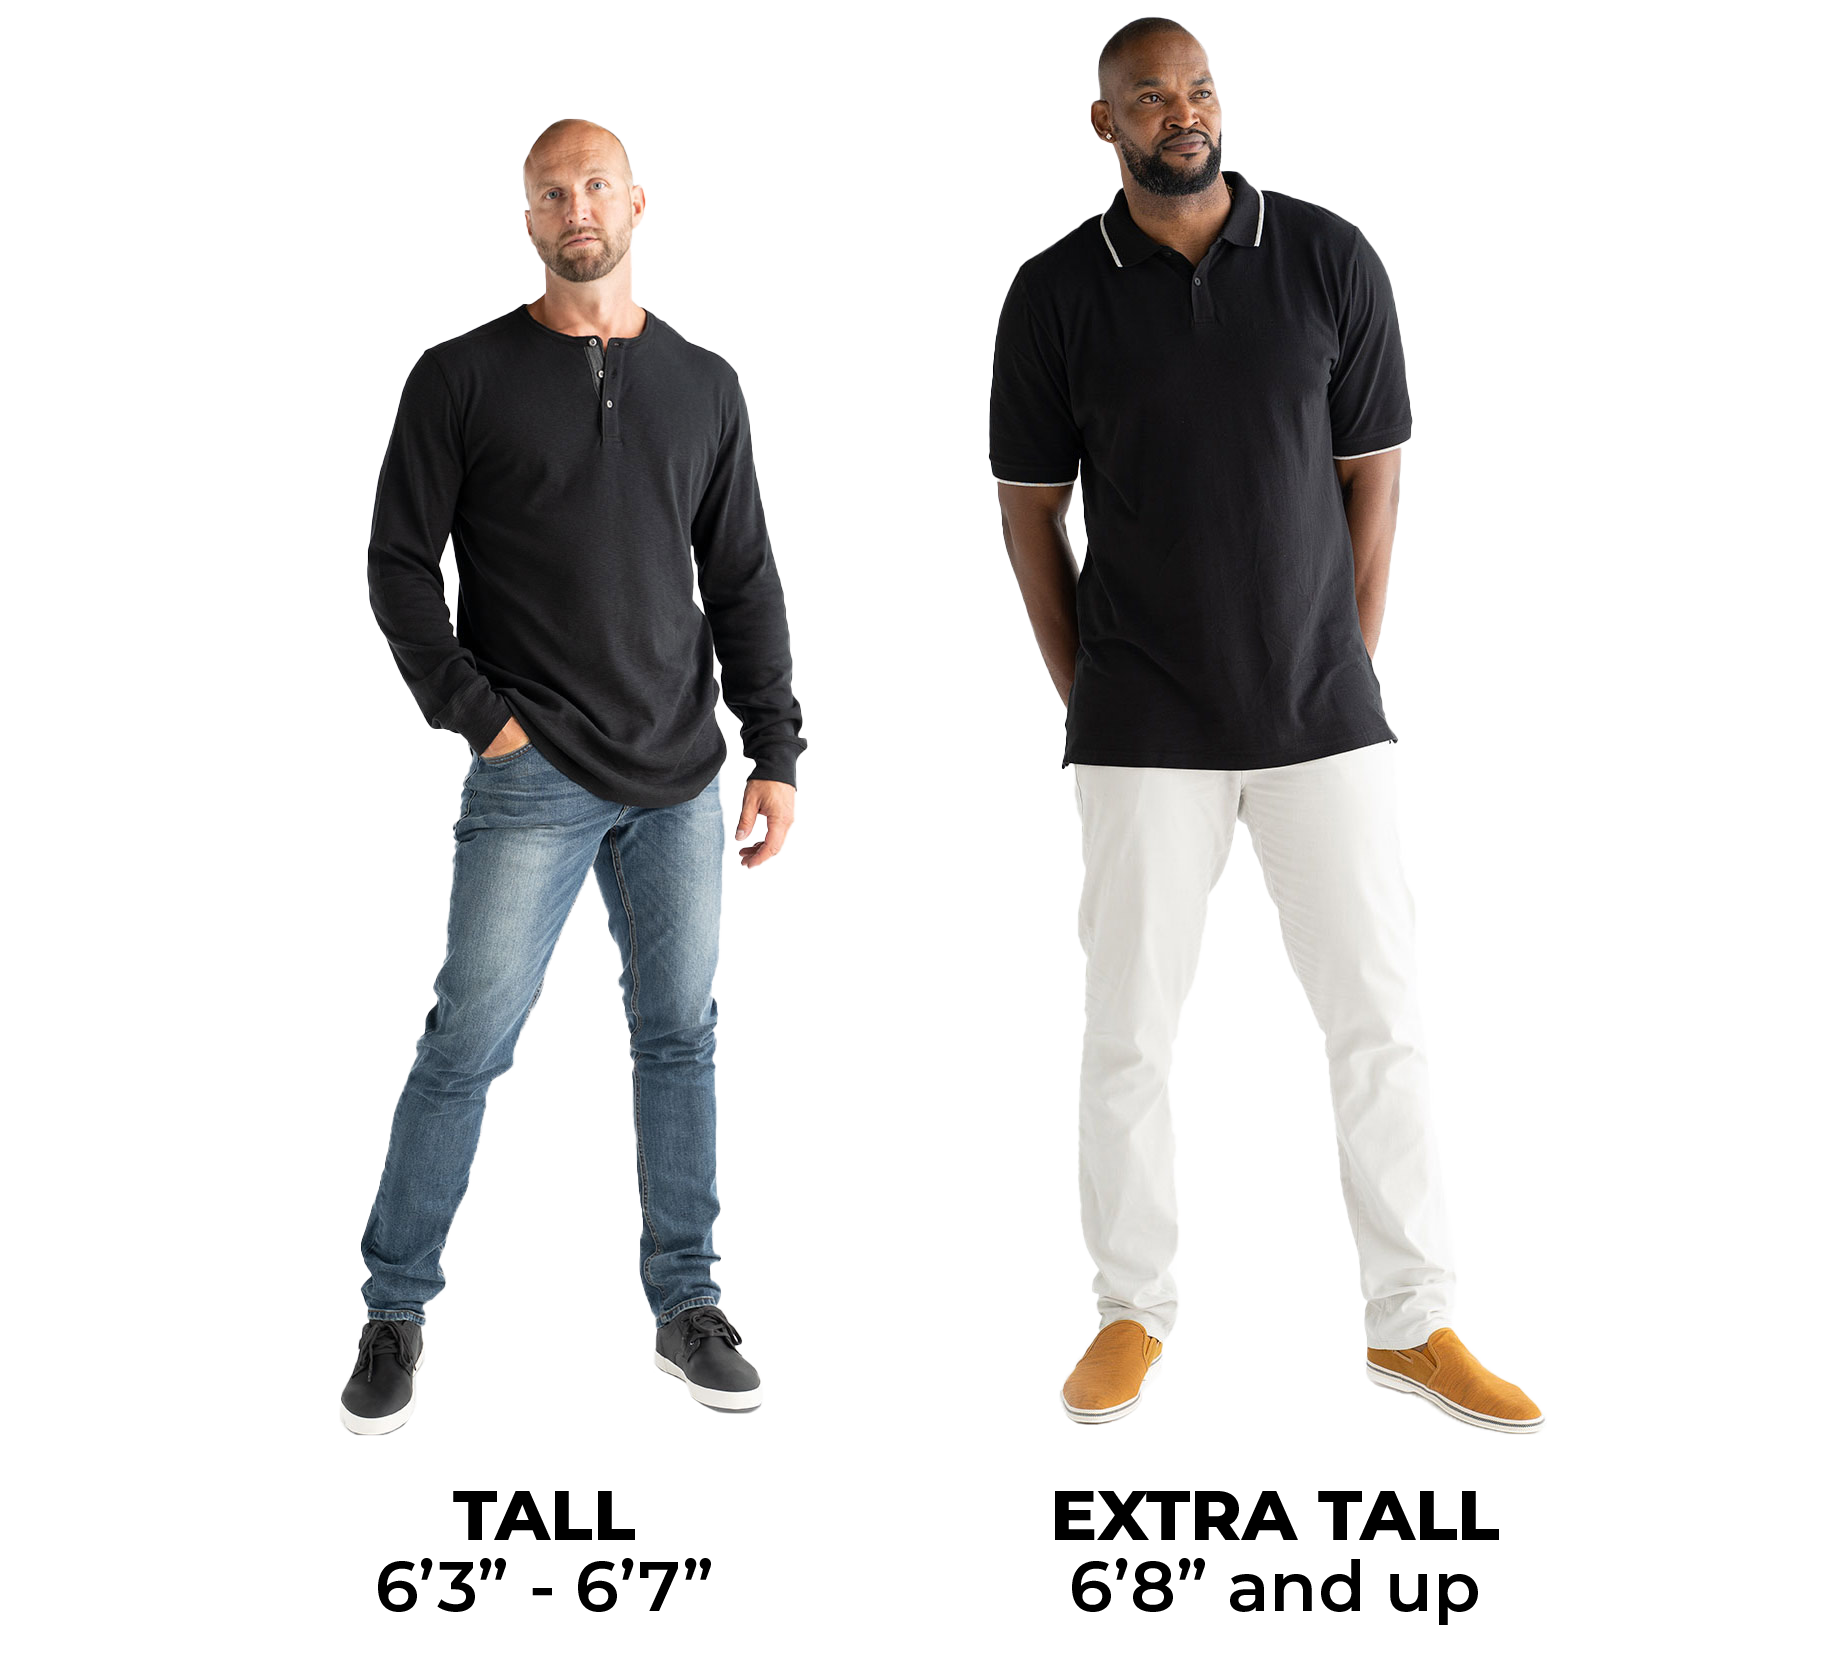 American Tall - Our clothing sizes fit tall men perfectly